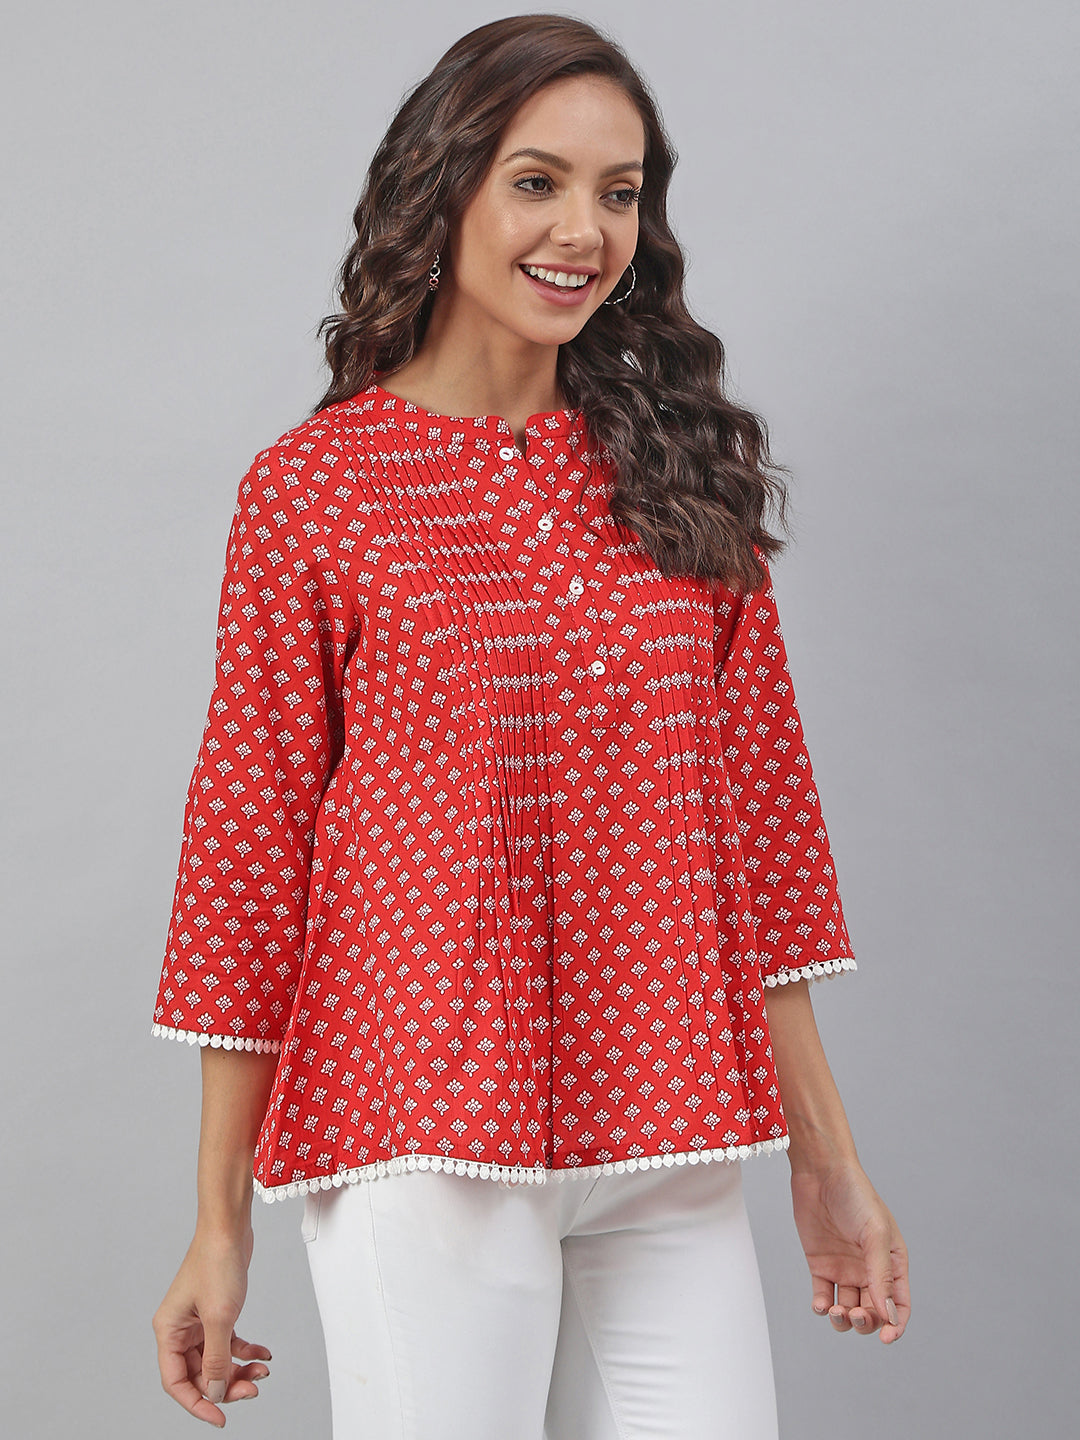 Women's Red Cotton Floral Print Flared Top - Manohara